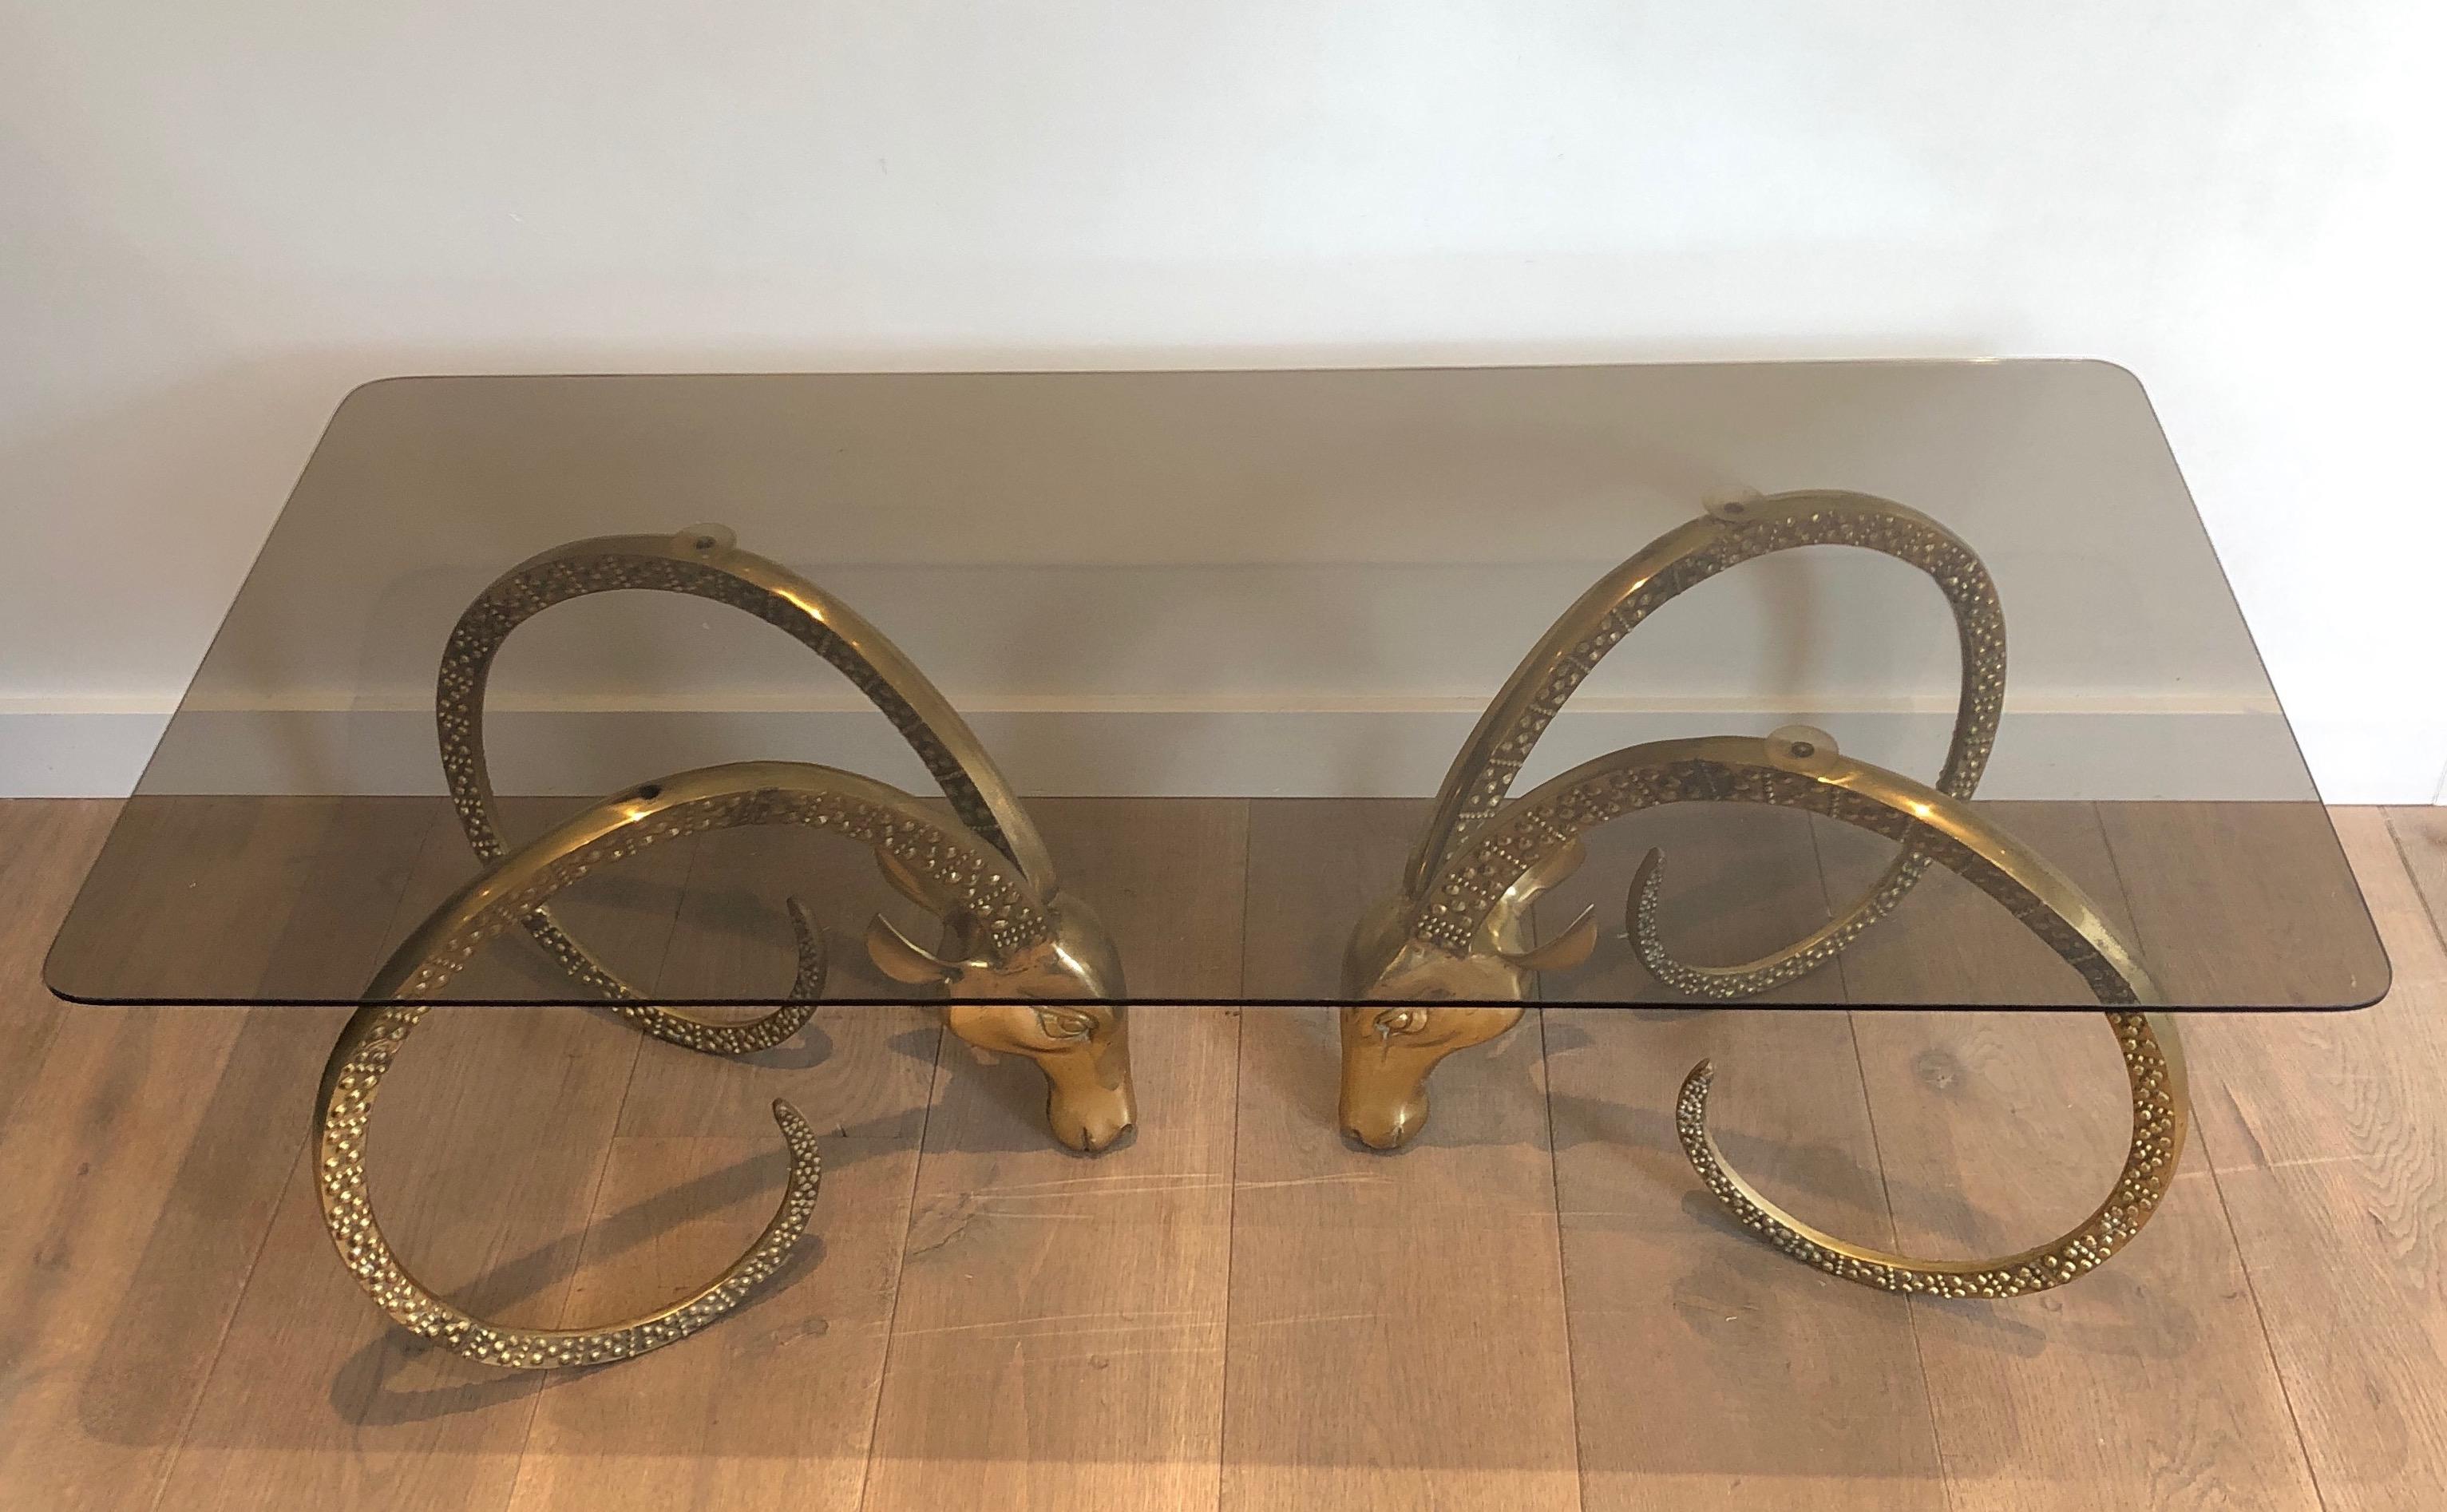 This very nice coffee table is made of bronze. The cocktail table represents 2 Ibex heads that are part of the base. This is a French work by Alain Chervet. Circa 1970.